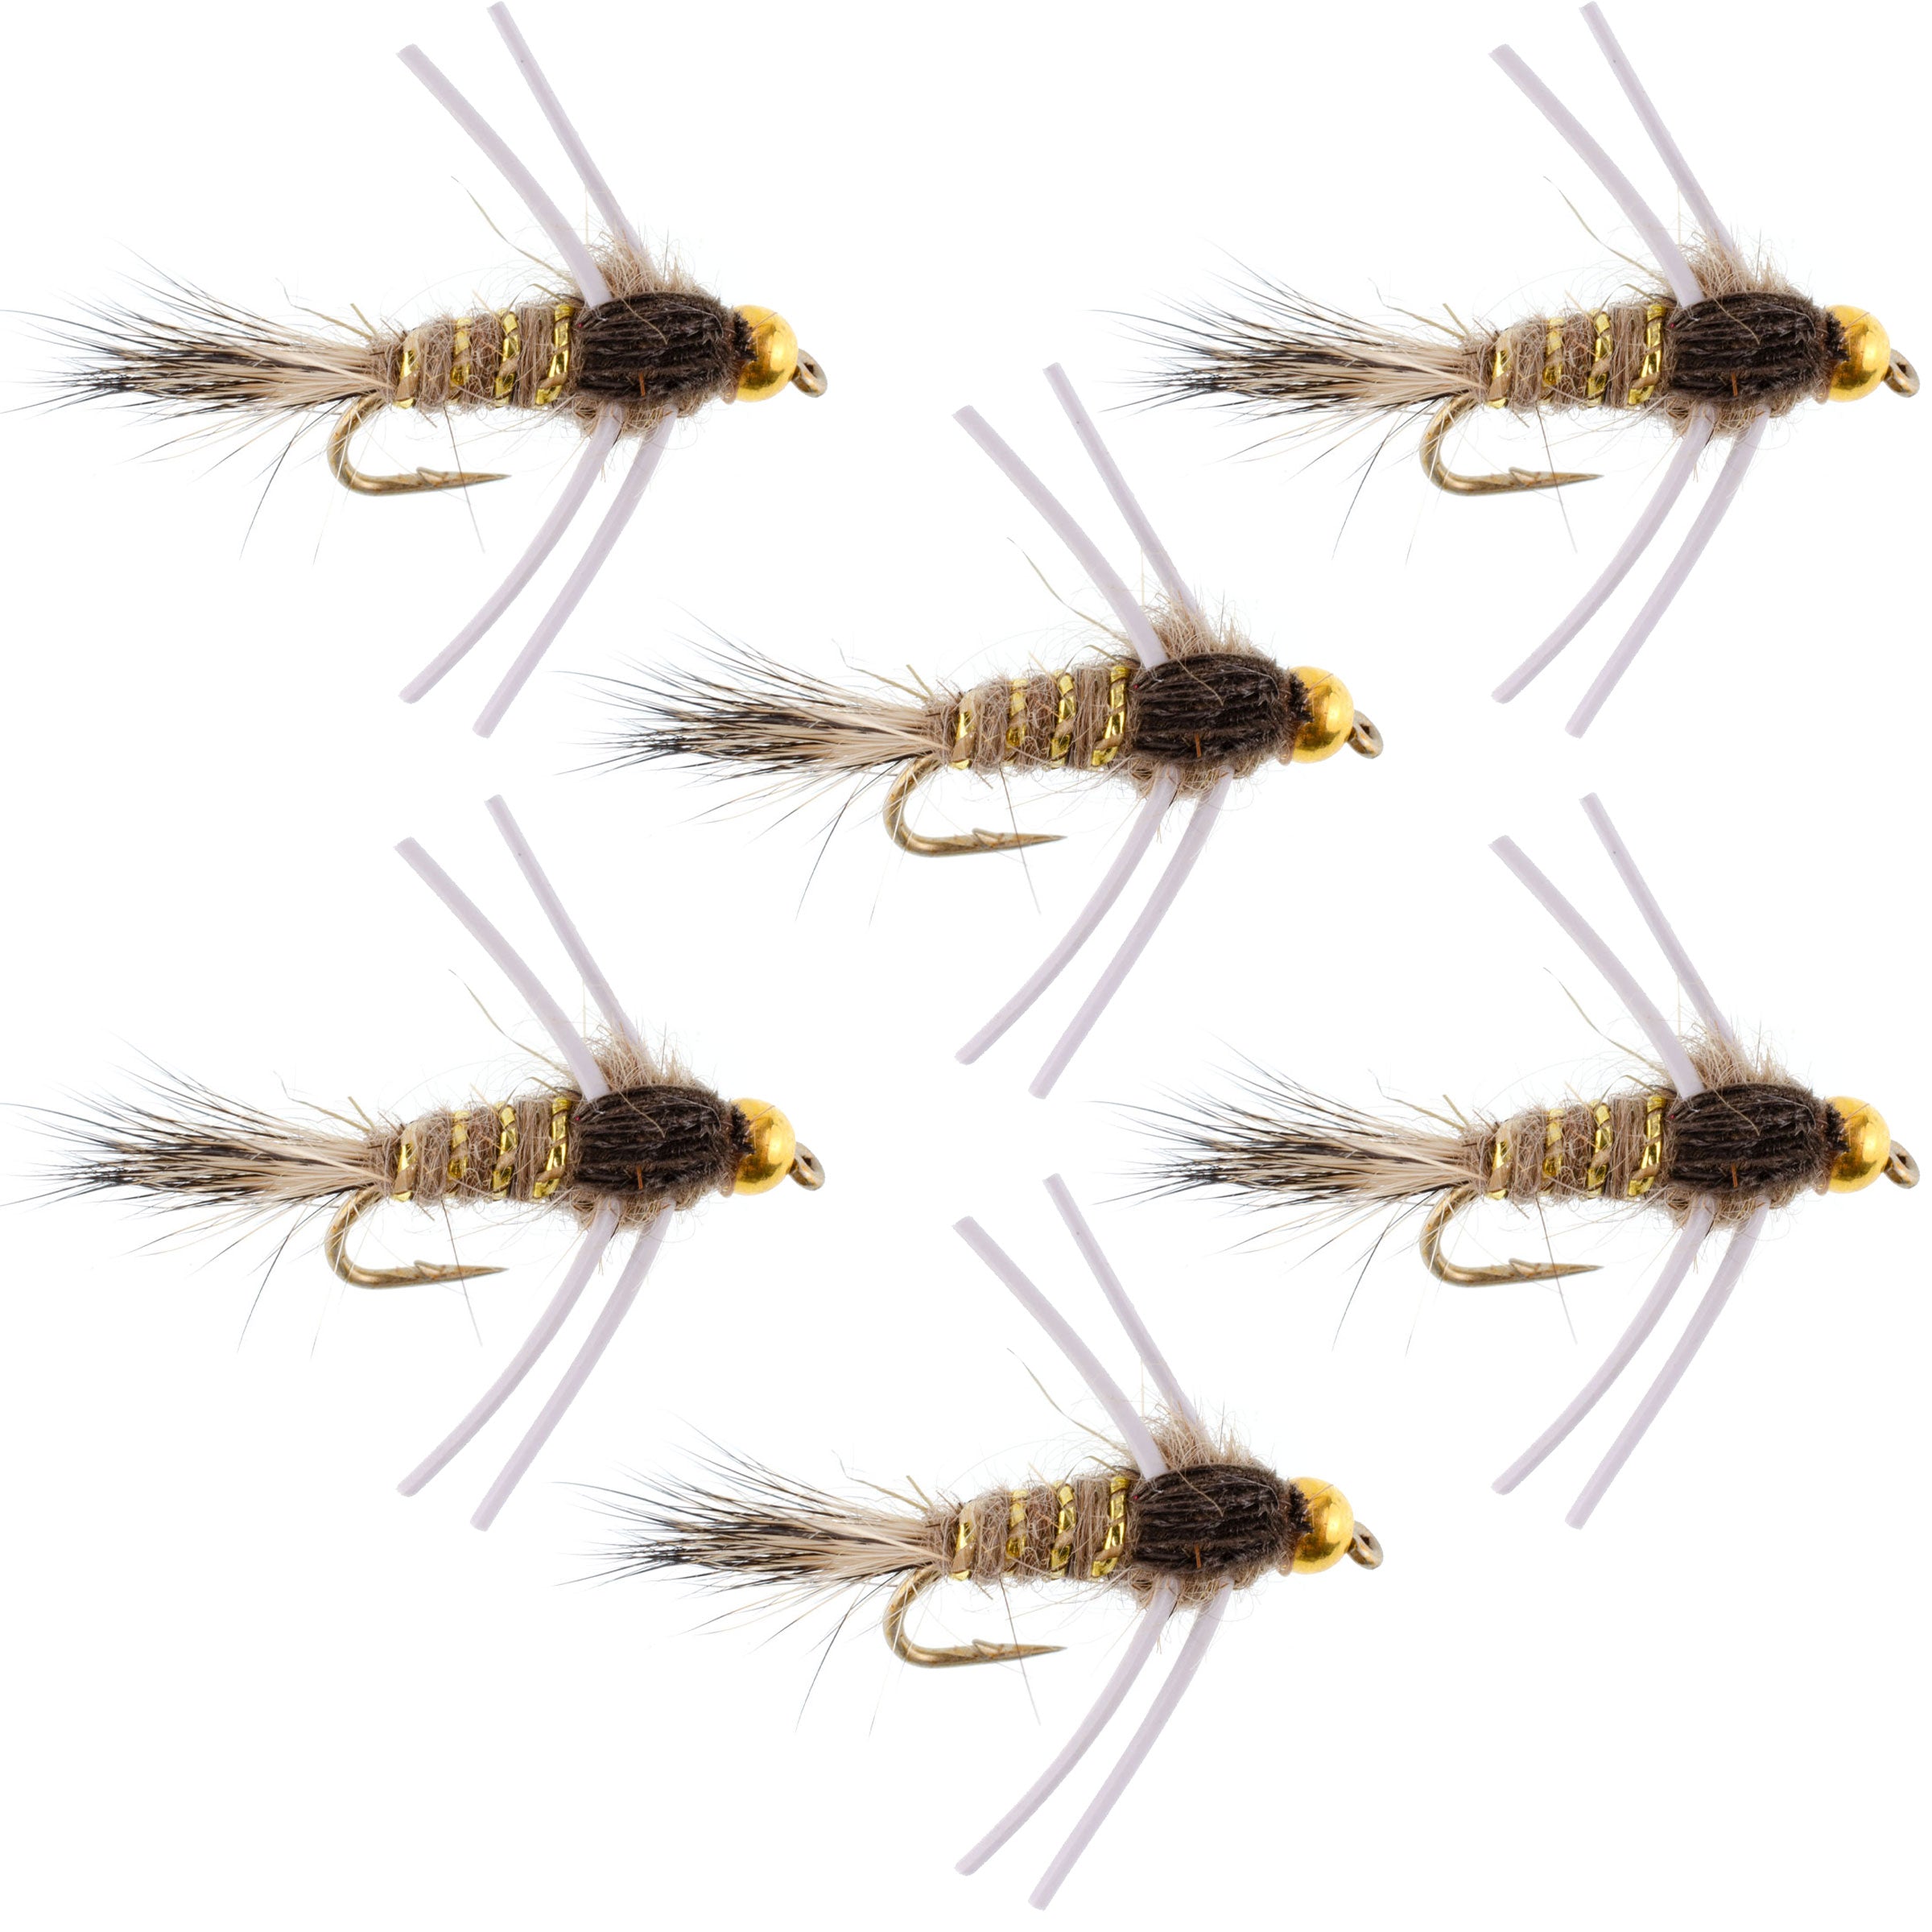 Tungsten Bead Head Rubber Legs Natural Gold-Ribbed Hare's Ear Trout Fly Nymph - 6 Flies Hook Size 16